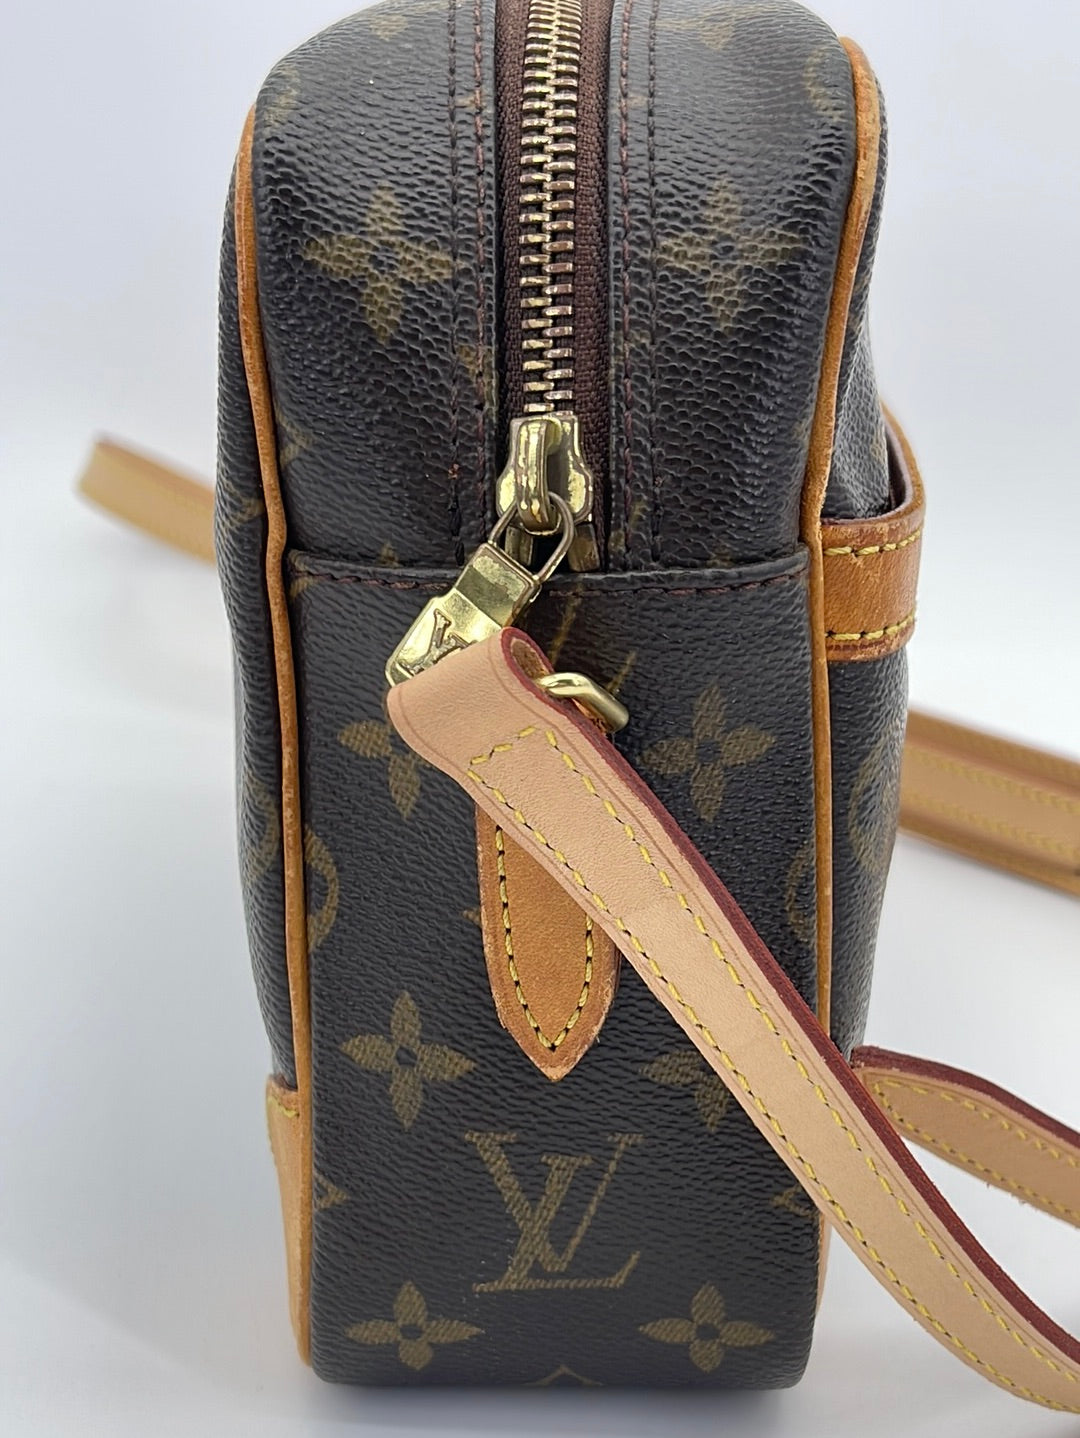 PRELOVED Louis Vuitton Trocadero 27 Shoulder Bag with new strap SD0013 061423